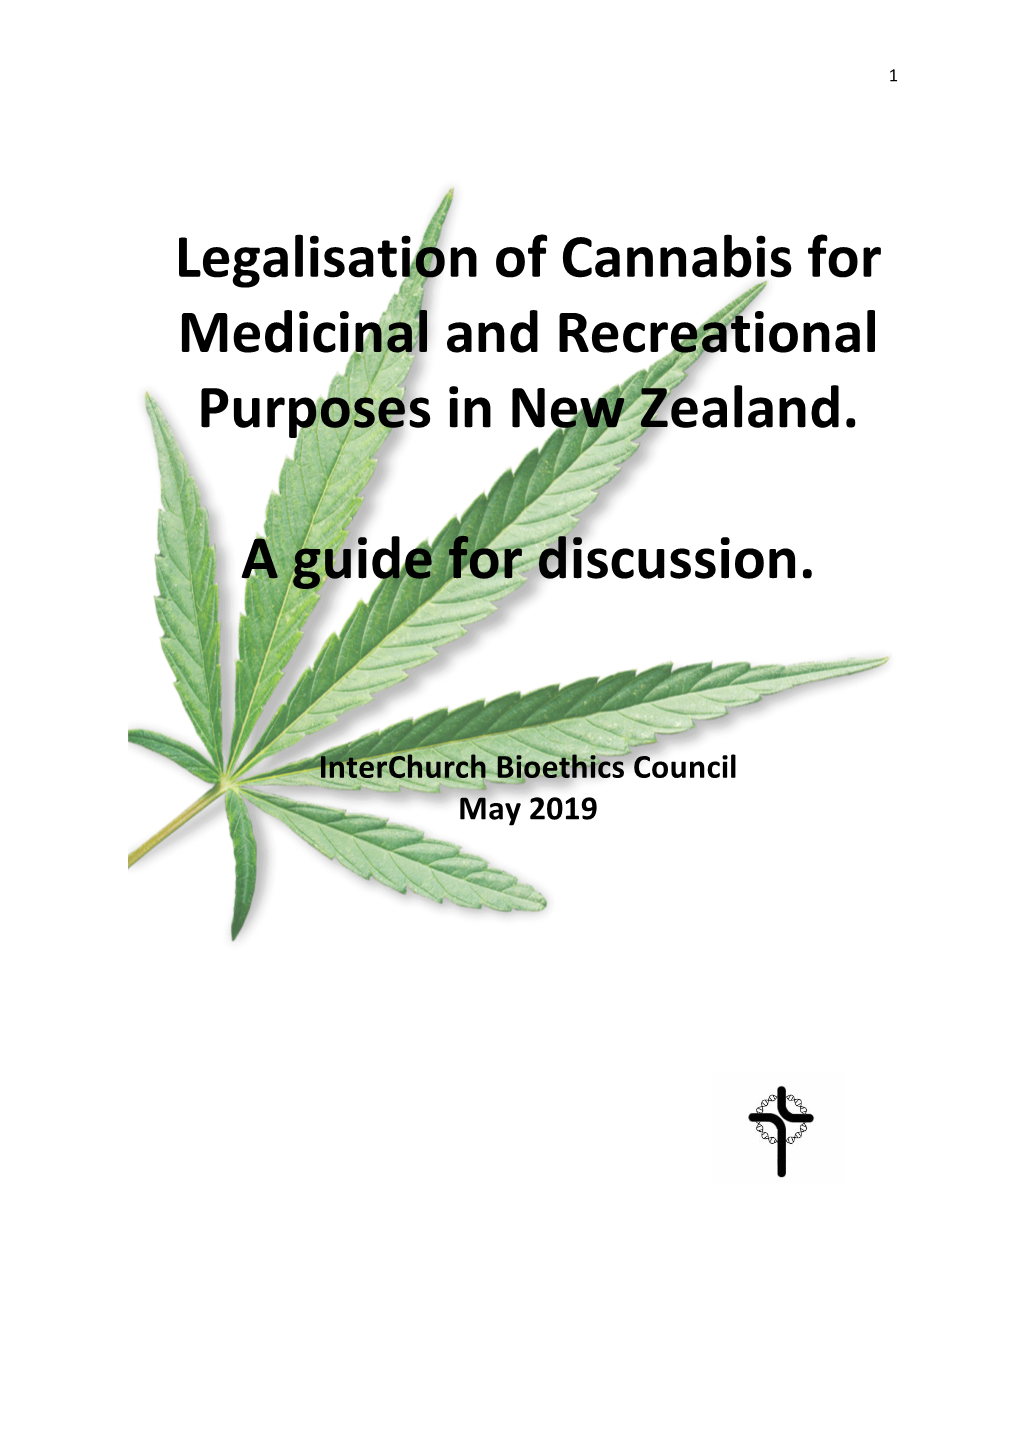 Legalisation of Cannabis for Medicinal and Recreational Purposes in New